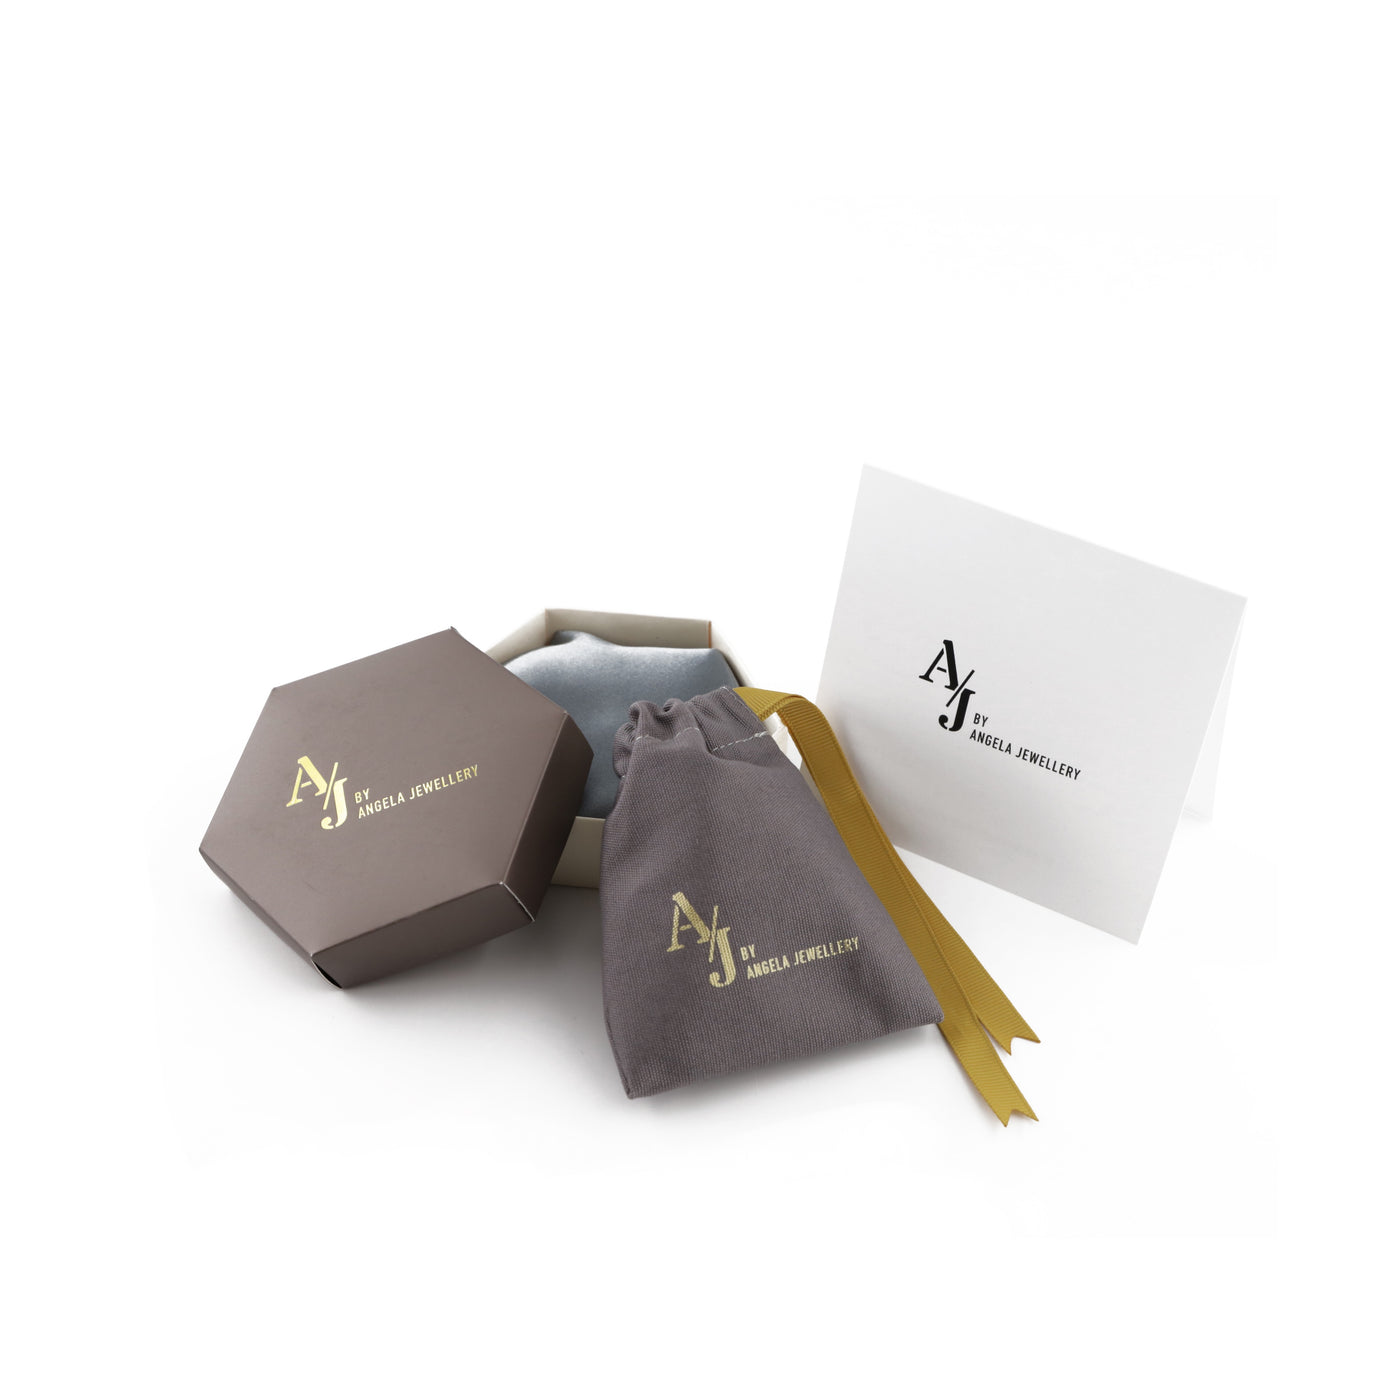 Initial Letter N Necklace | Angela Jewellery Australia